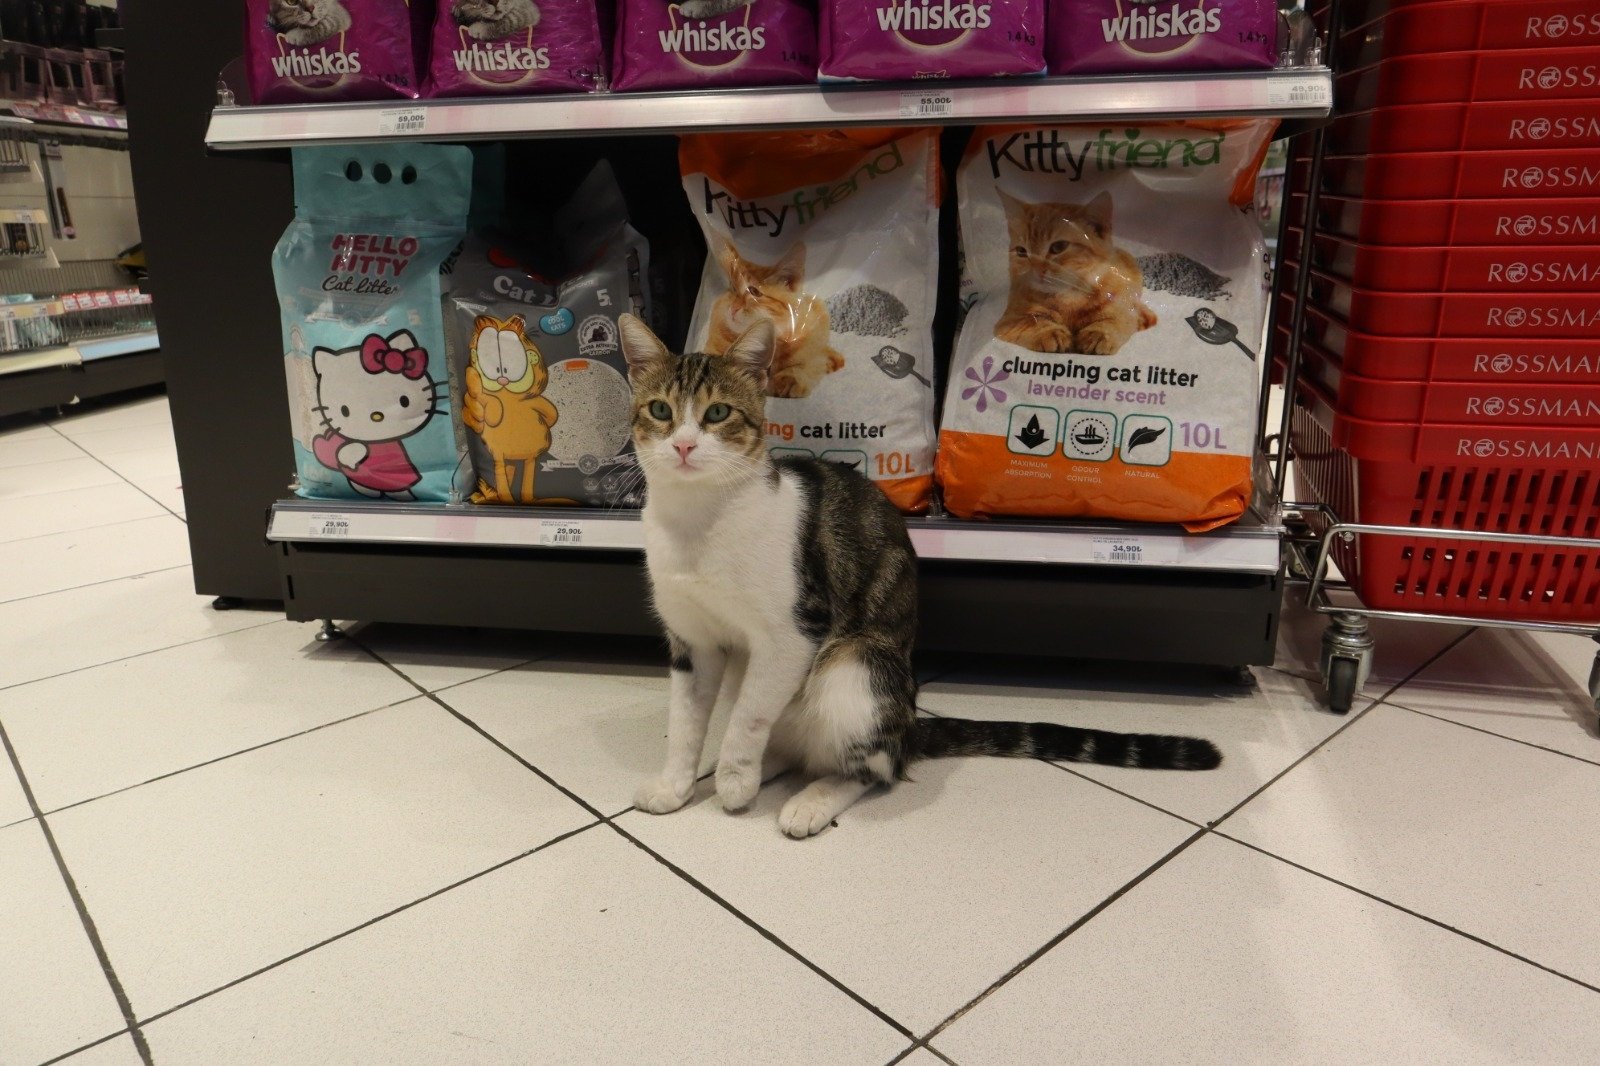 Nokta, a stray cat who went viral online as the &quot;beggar cat&quot; for tricking people into buying food for him, sits in front of cat food at a supermarket, in Istanbul, Turkey, Oct. 4, 2021. (Photo by Bulut Yamandağ)